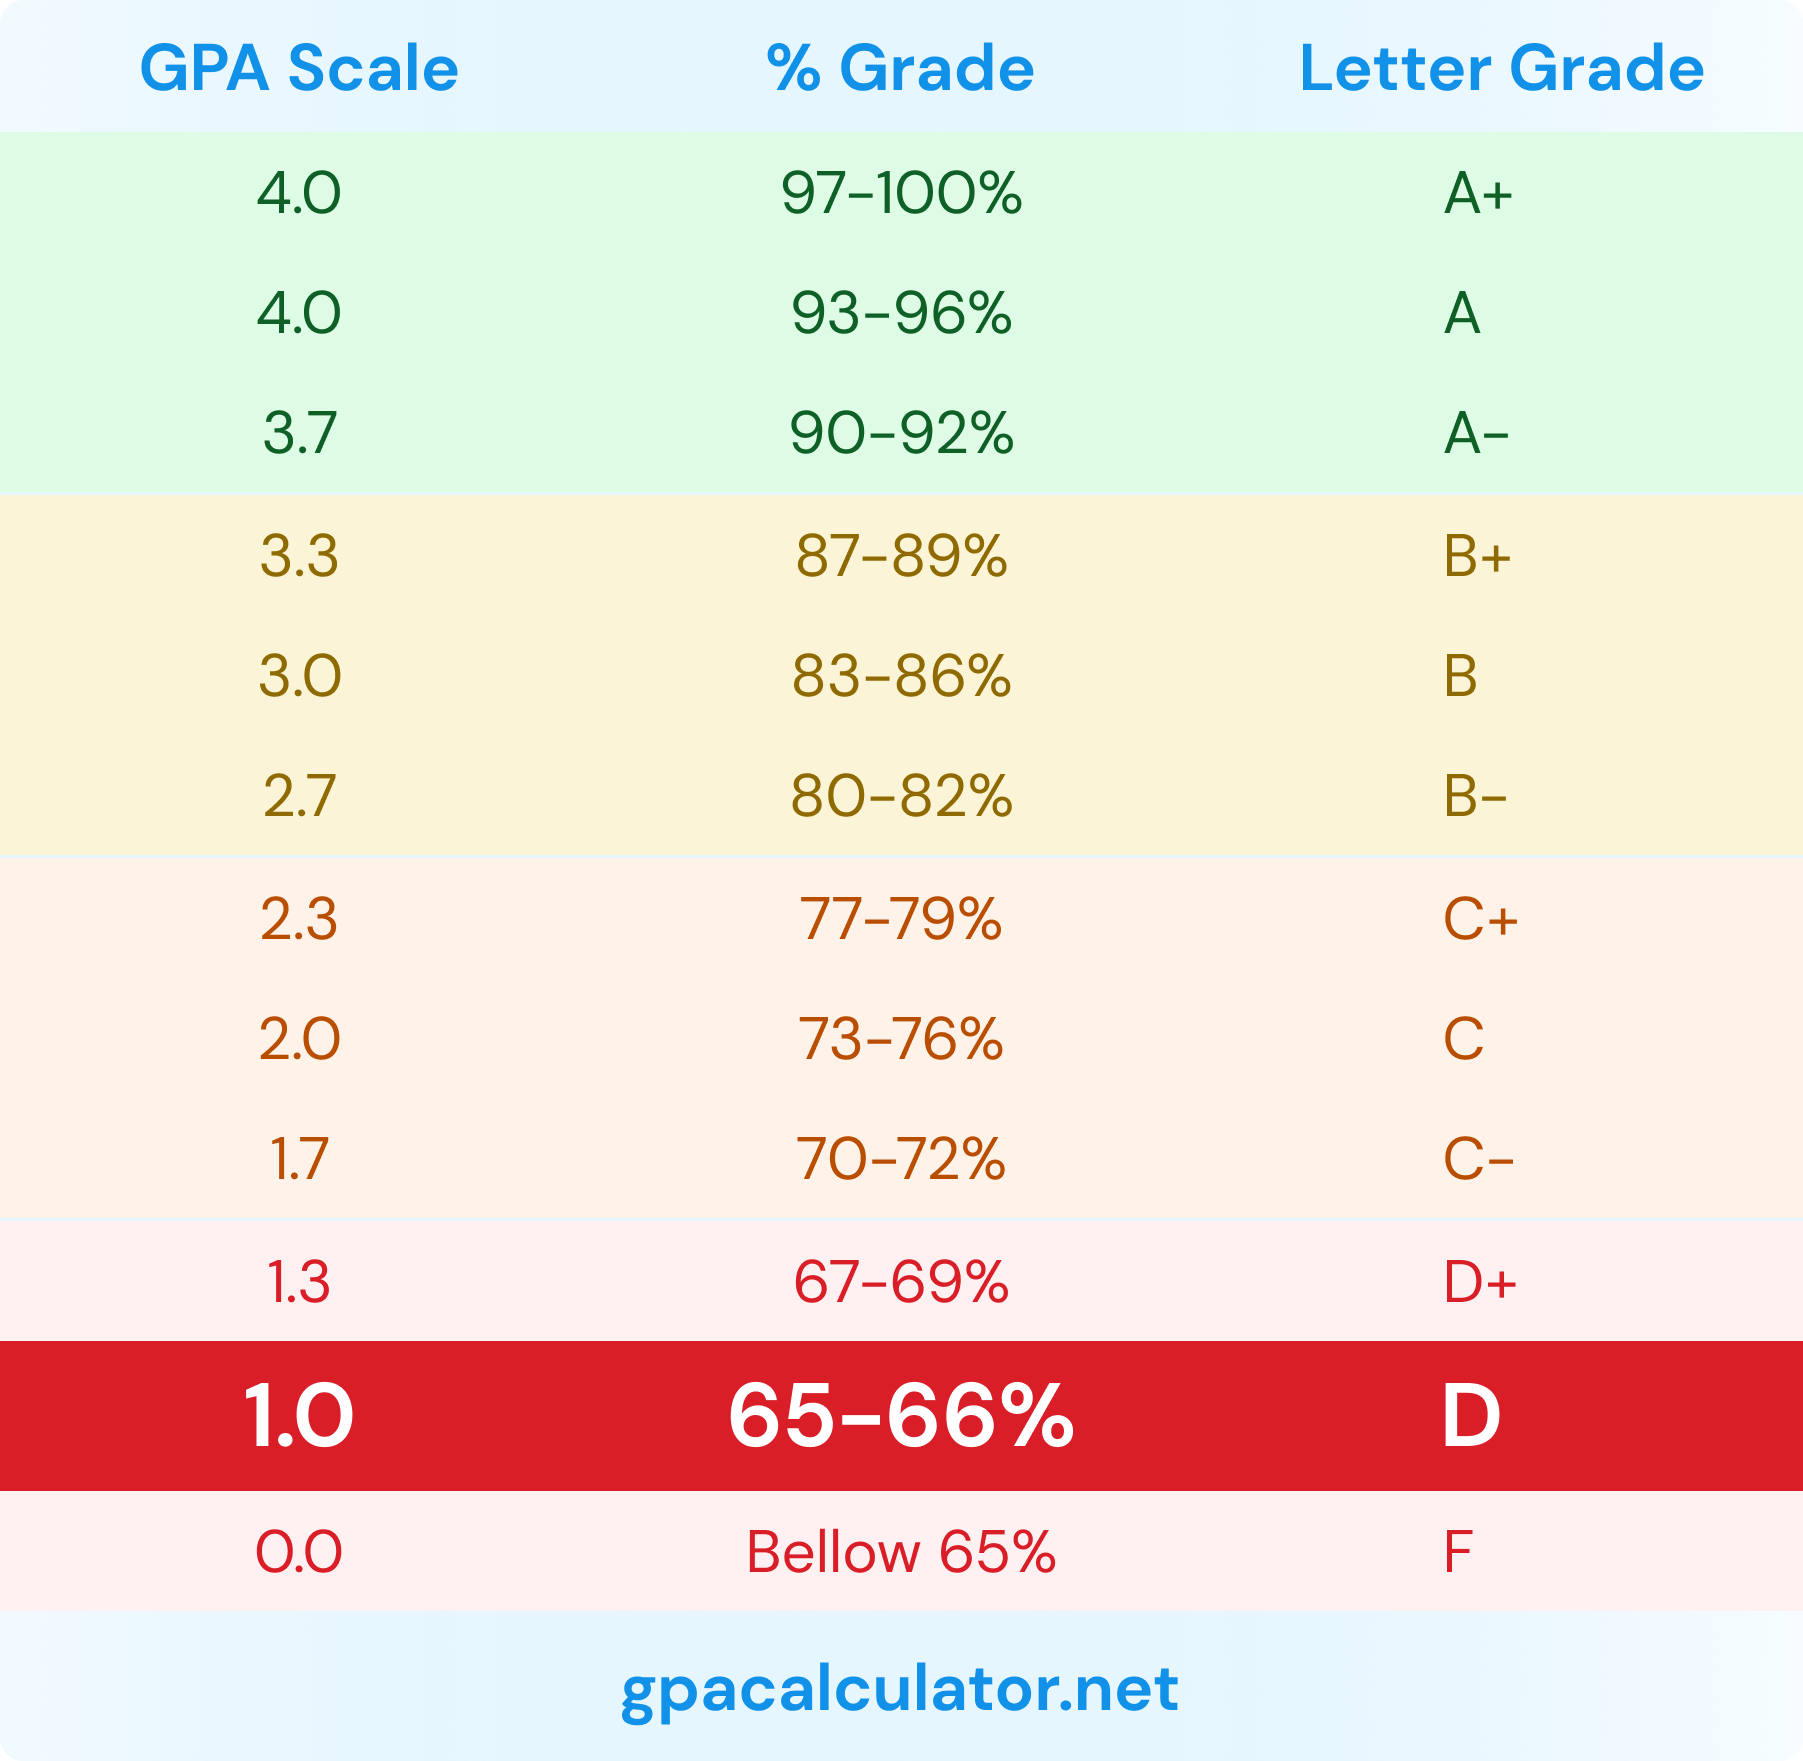 1-0-gpa-is-equivalent-to-65-66-or-d-grade